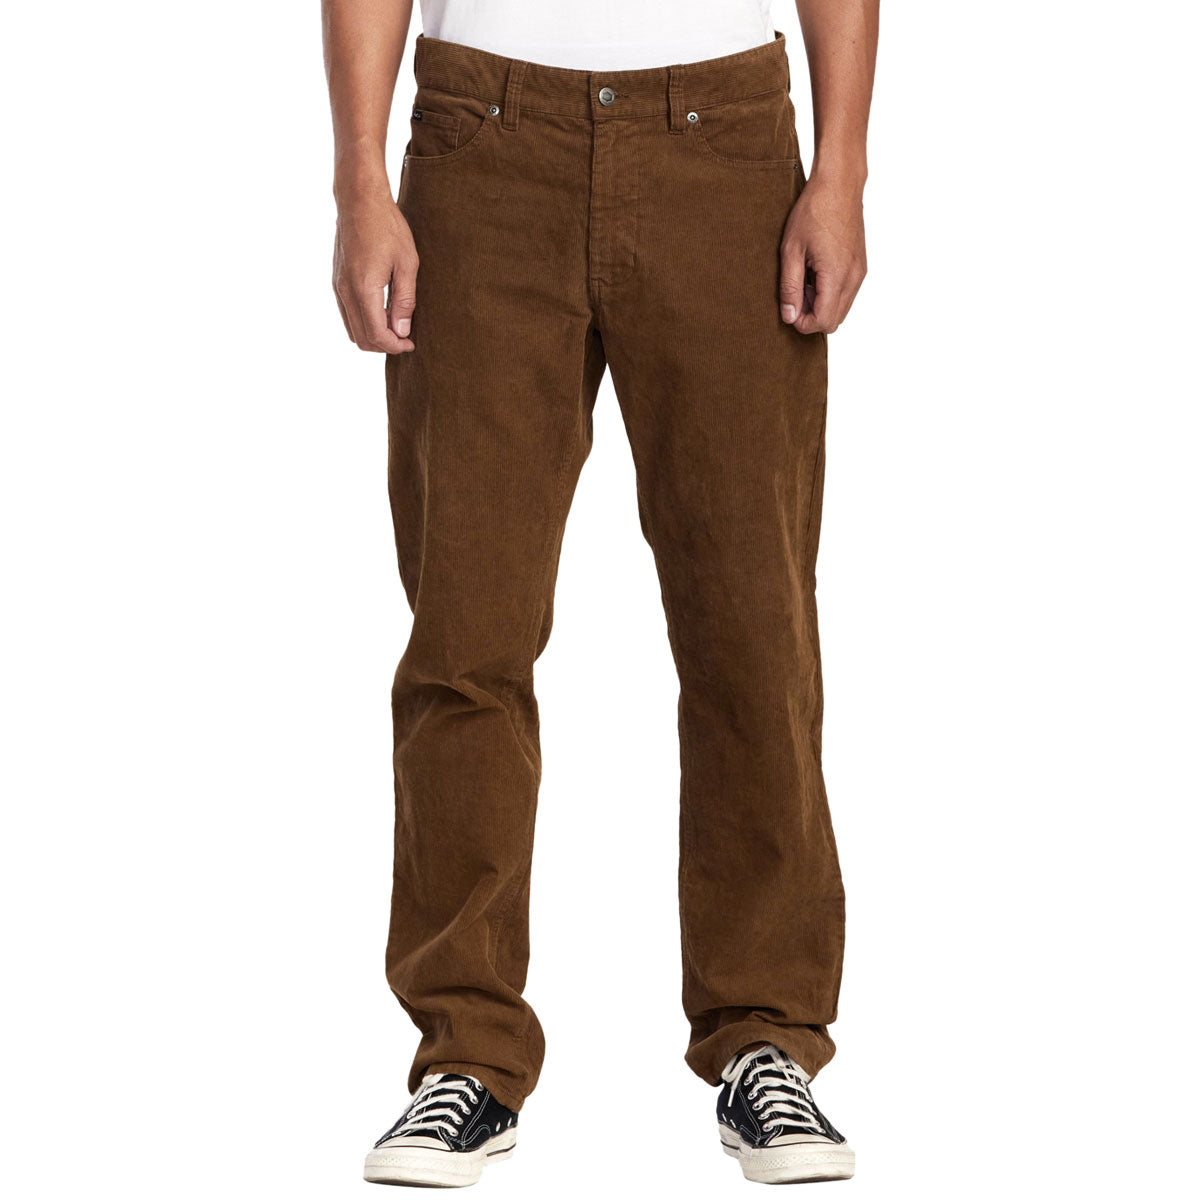 RVCA Daggers Pigment Cord Pants - Bombay Brown image 1